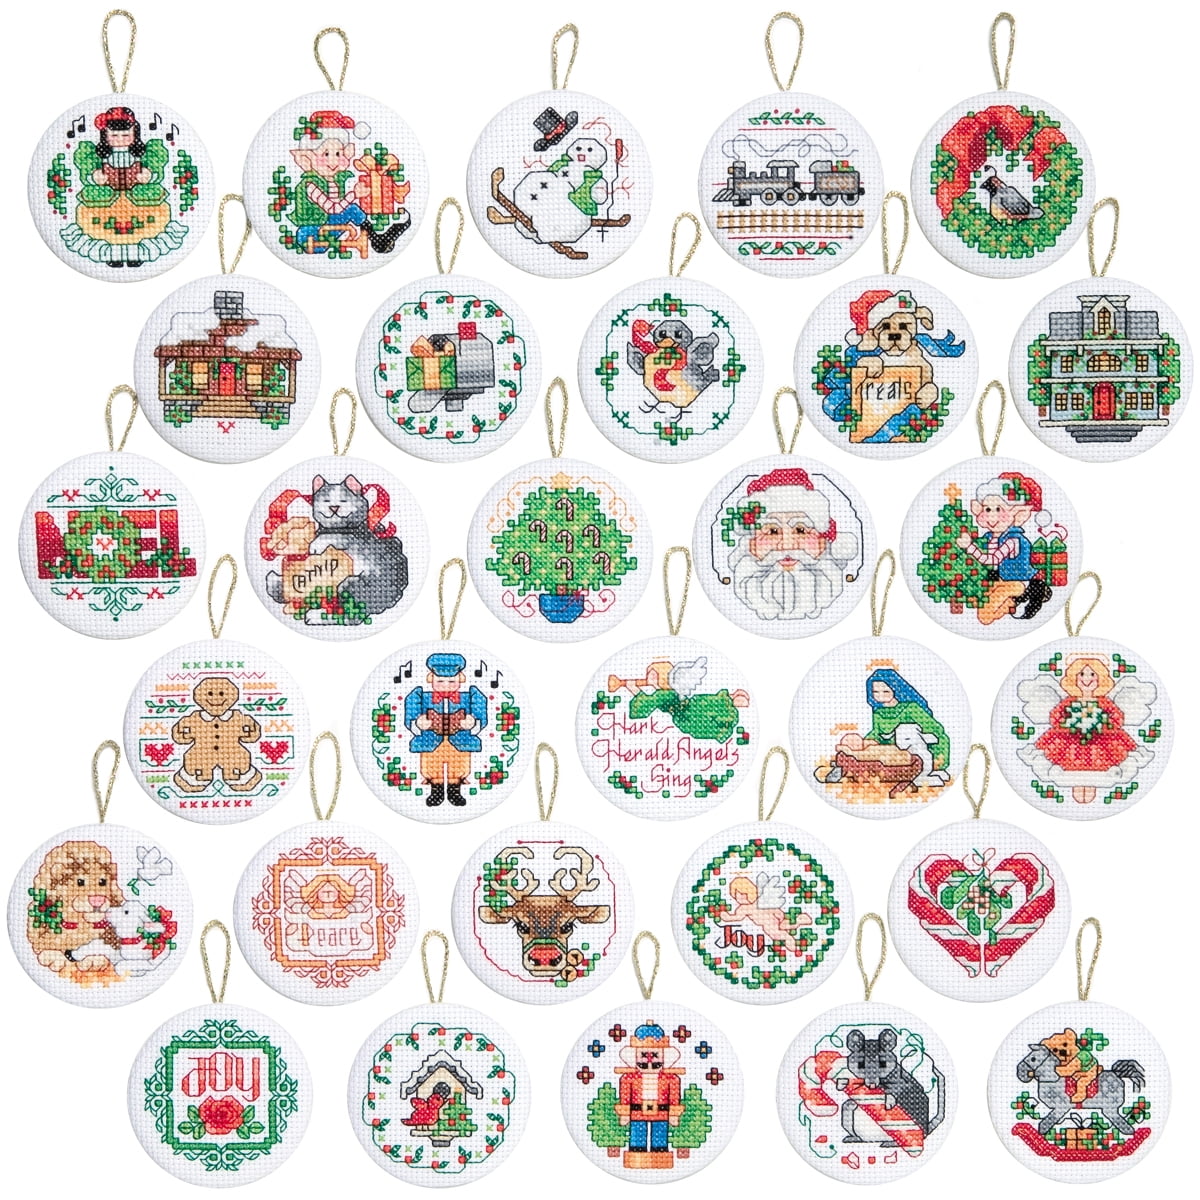 Joy Tag Ornaments Counted Cross Stitch Kit-5 High 14 Count Set Of 9, Pk 1  